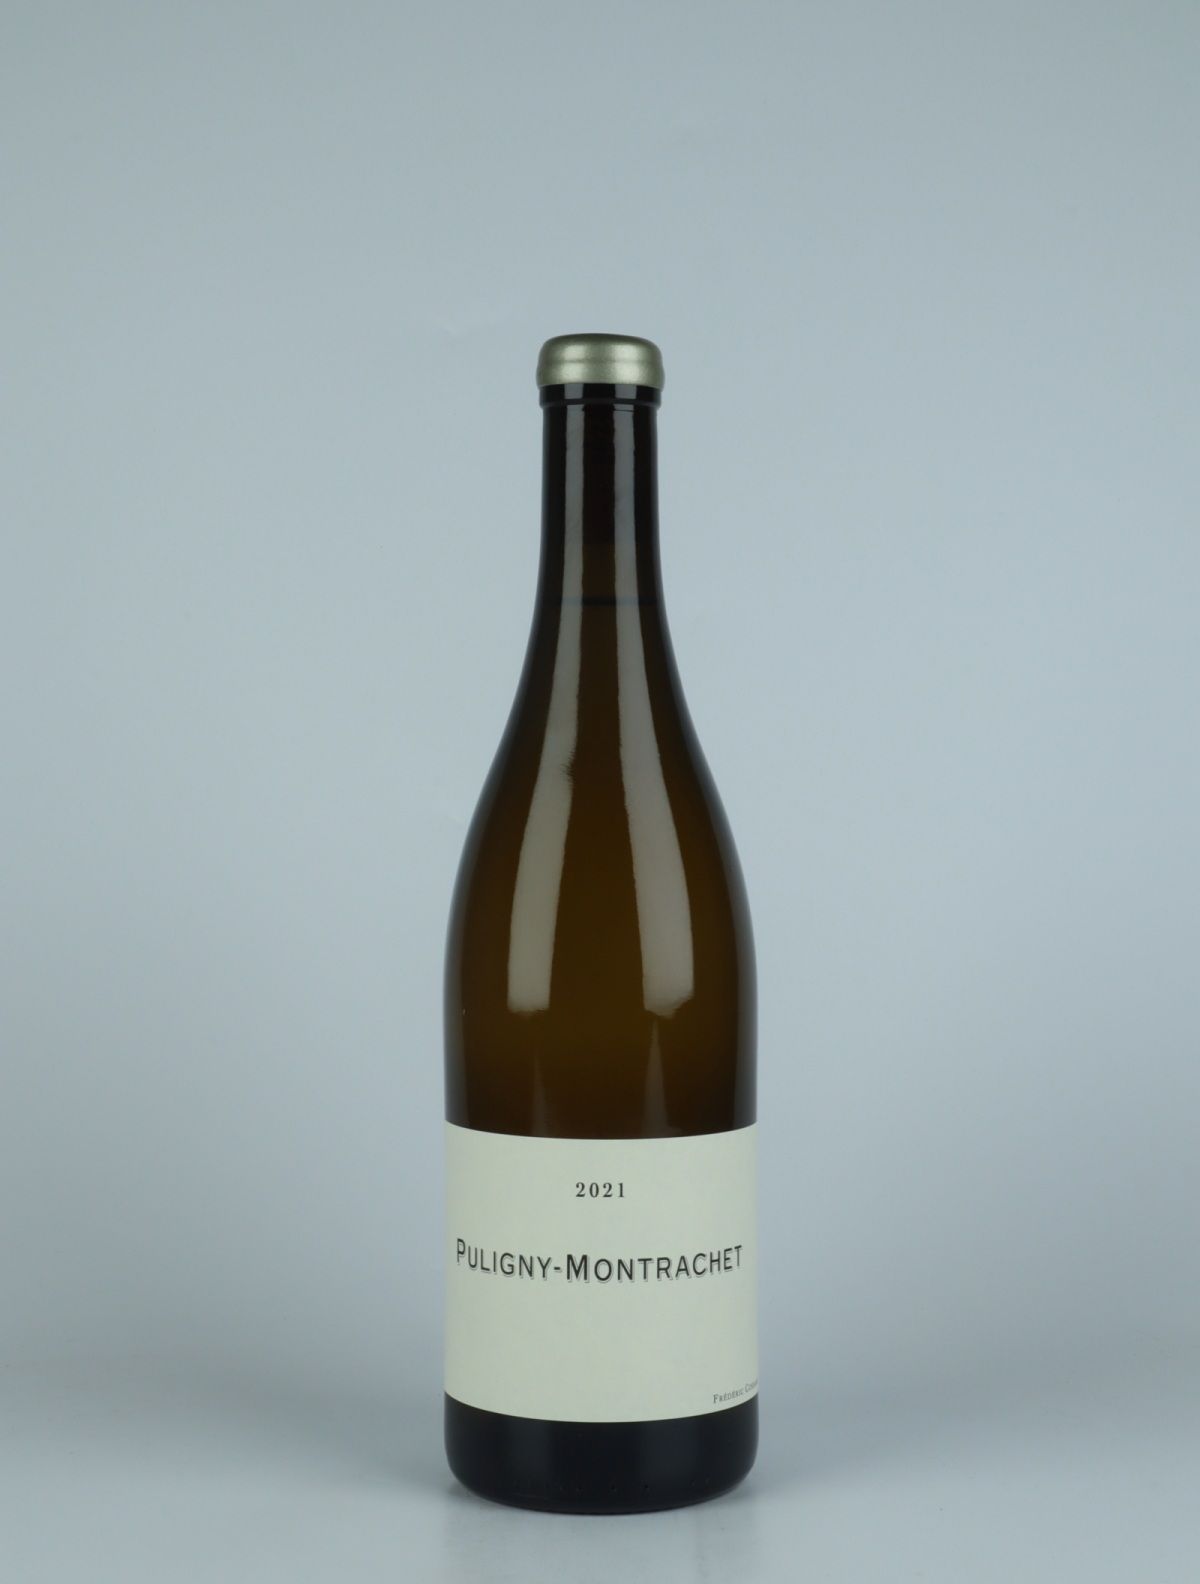 A bottle 2021 Puligny Montrachet White wine from Frédéric Cossard, Burgundy in France